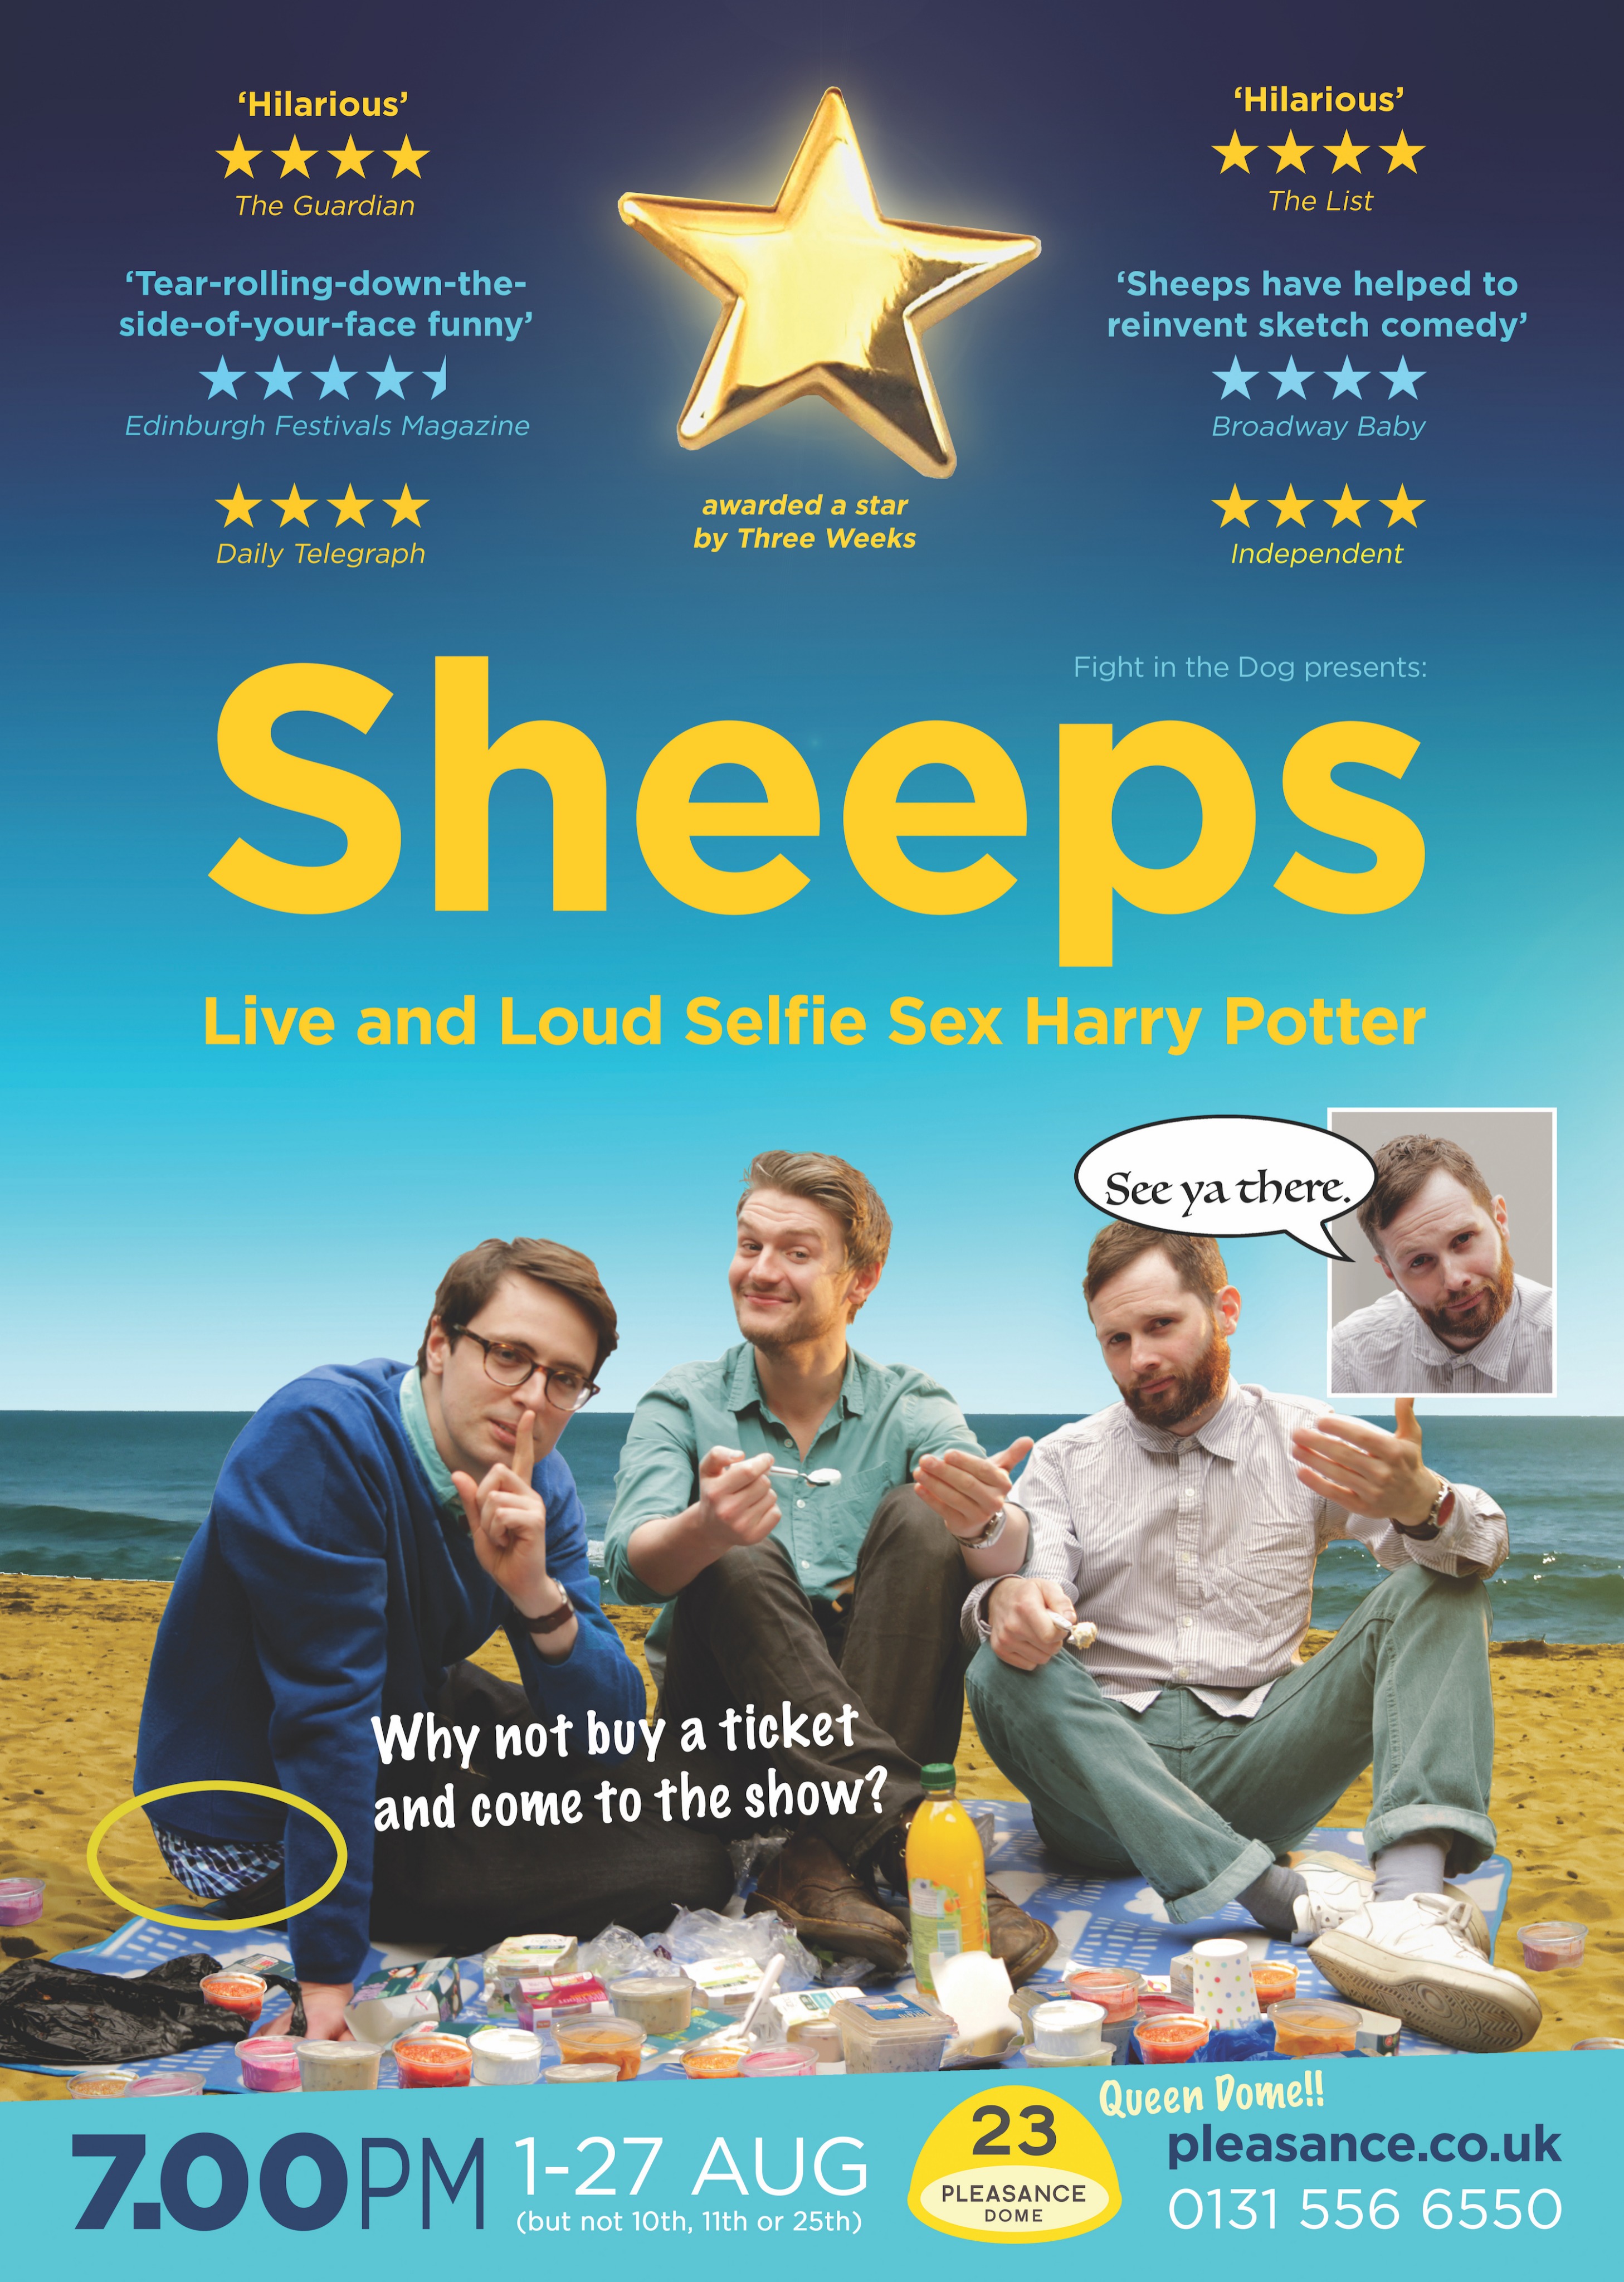 The poster for Sheeps: Live and Loud Selfie Sex Harry Potter